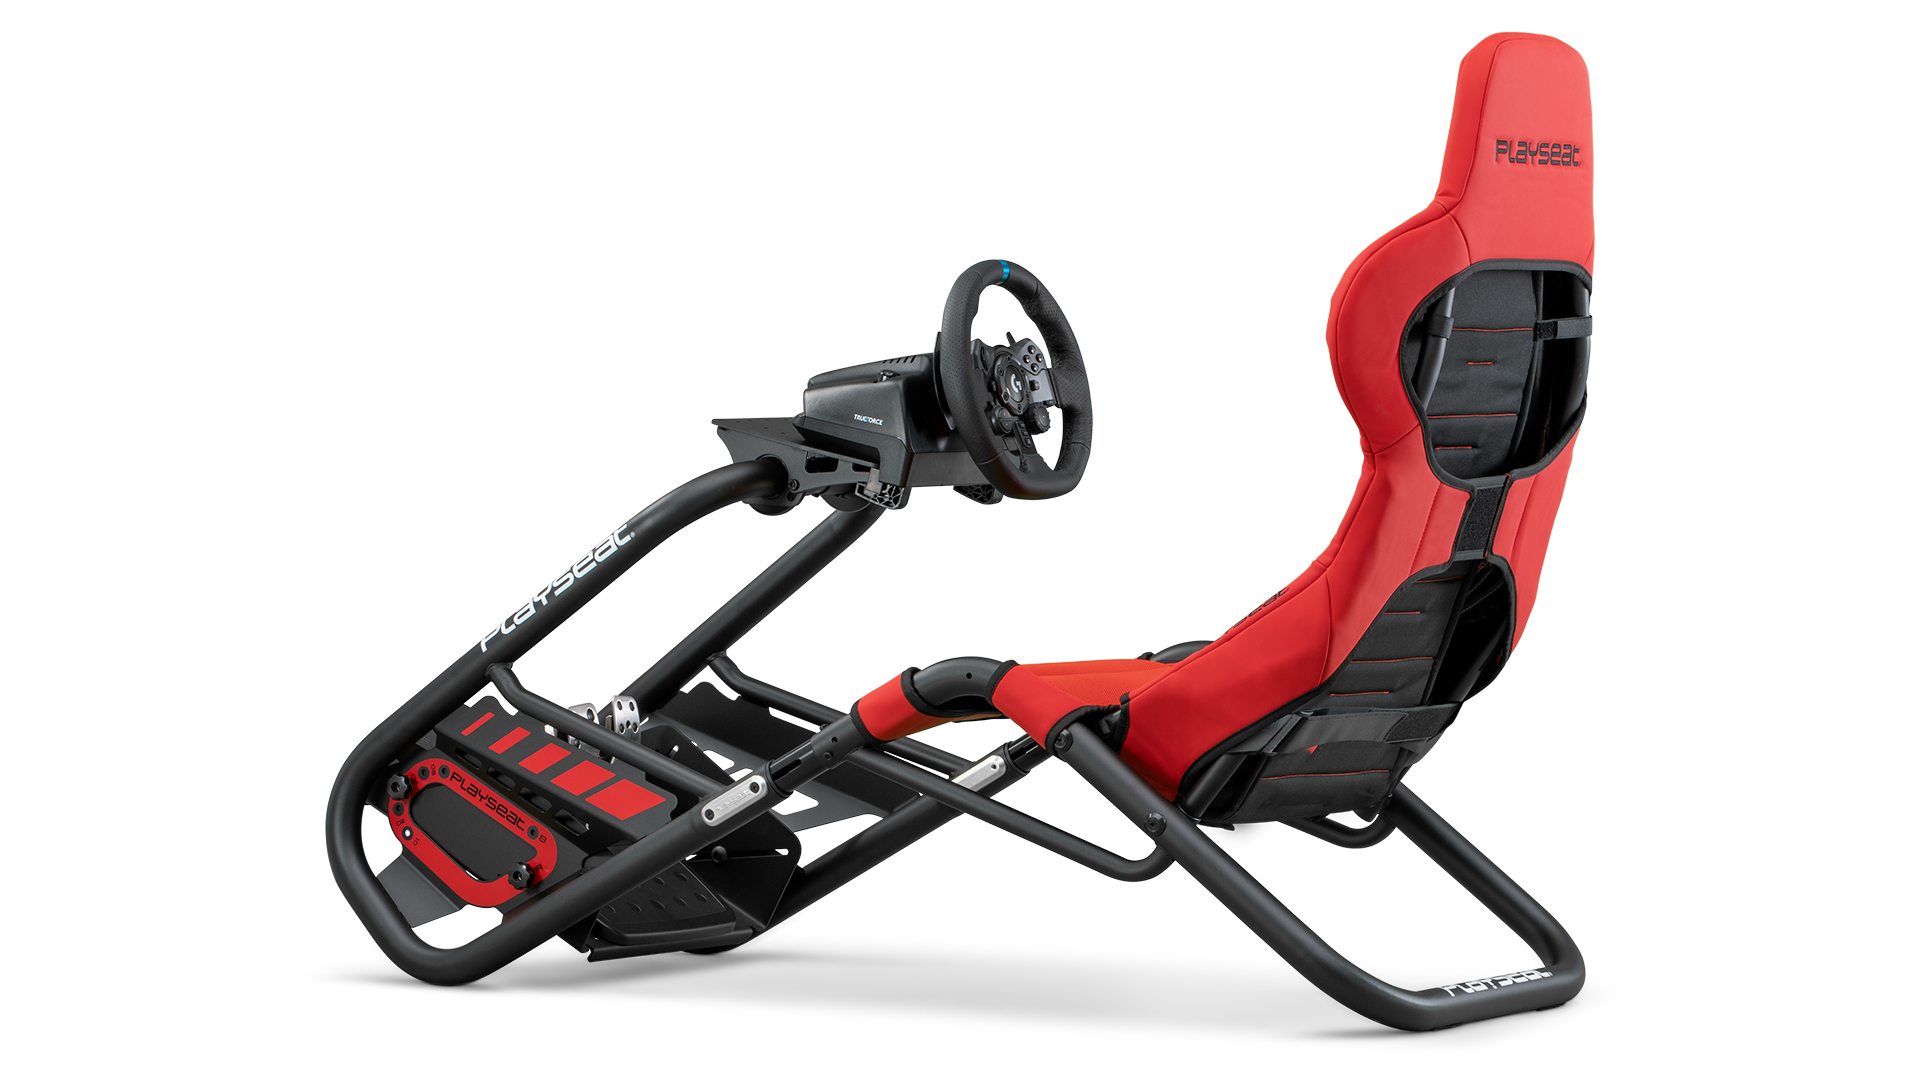 playseat-trophy-red-direct-drive-simulator-back-angle-view-logitech-1920x1080-3.png